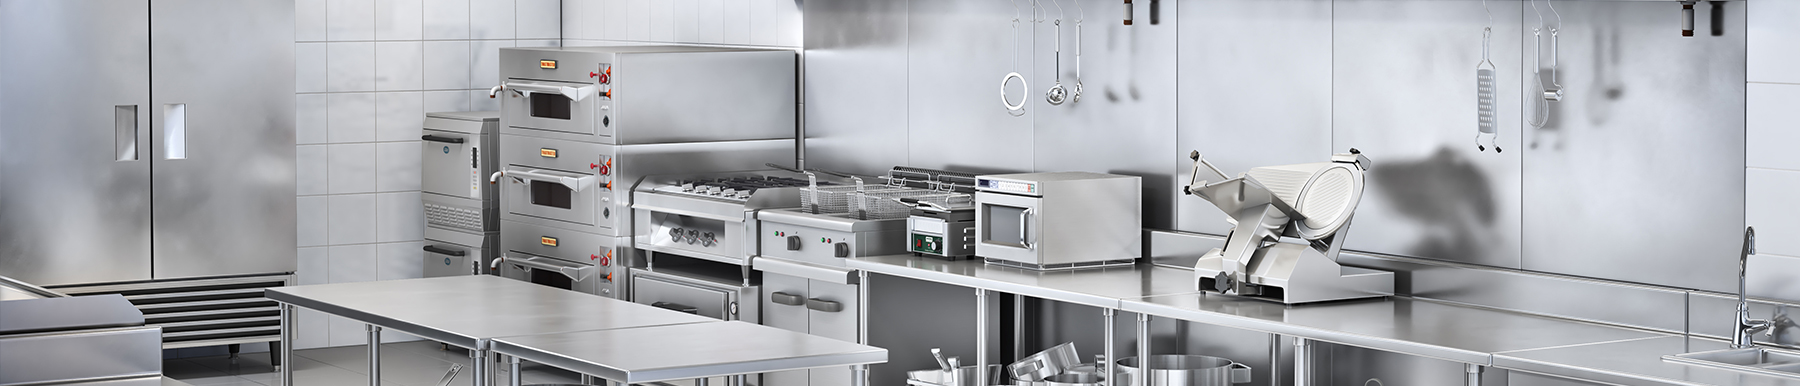 Catering Equipment Suppliers Near Ipswich | H2 Catering Equipment Catering Equipment